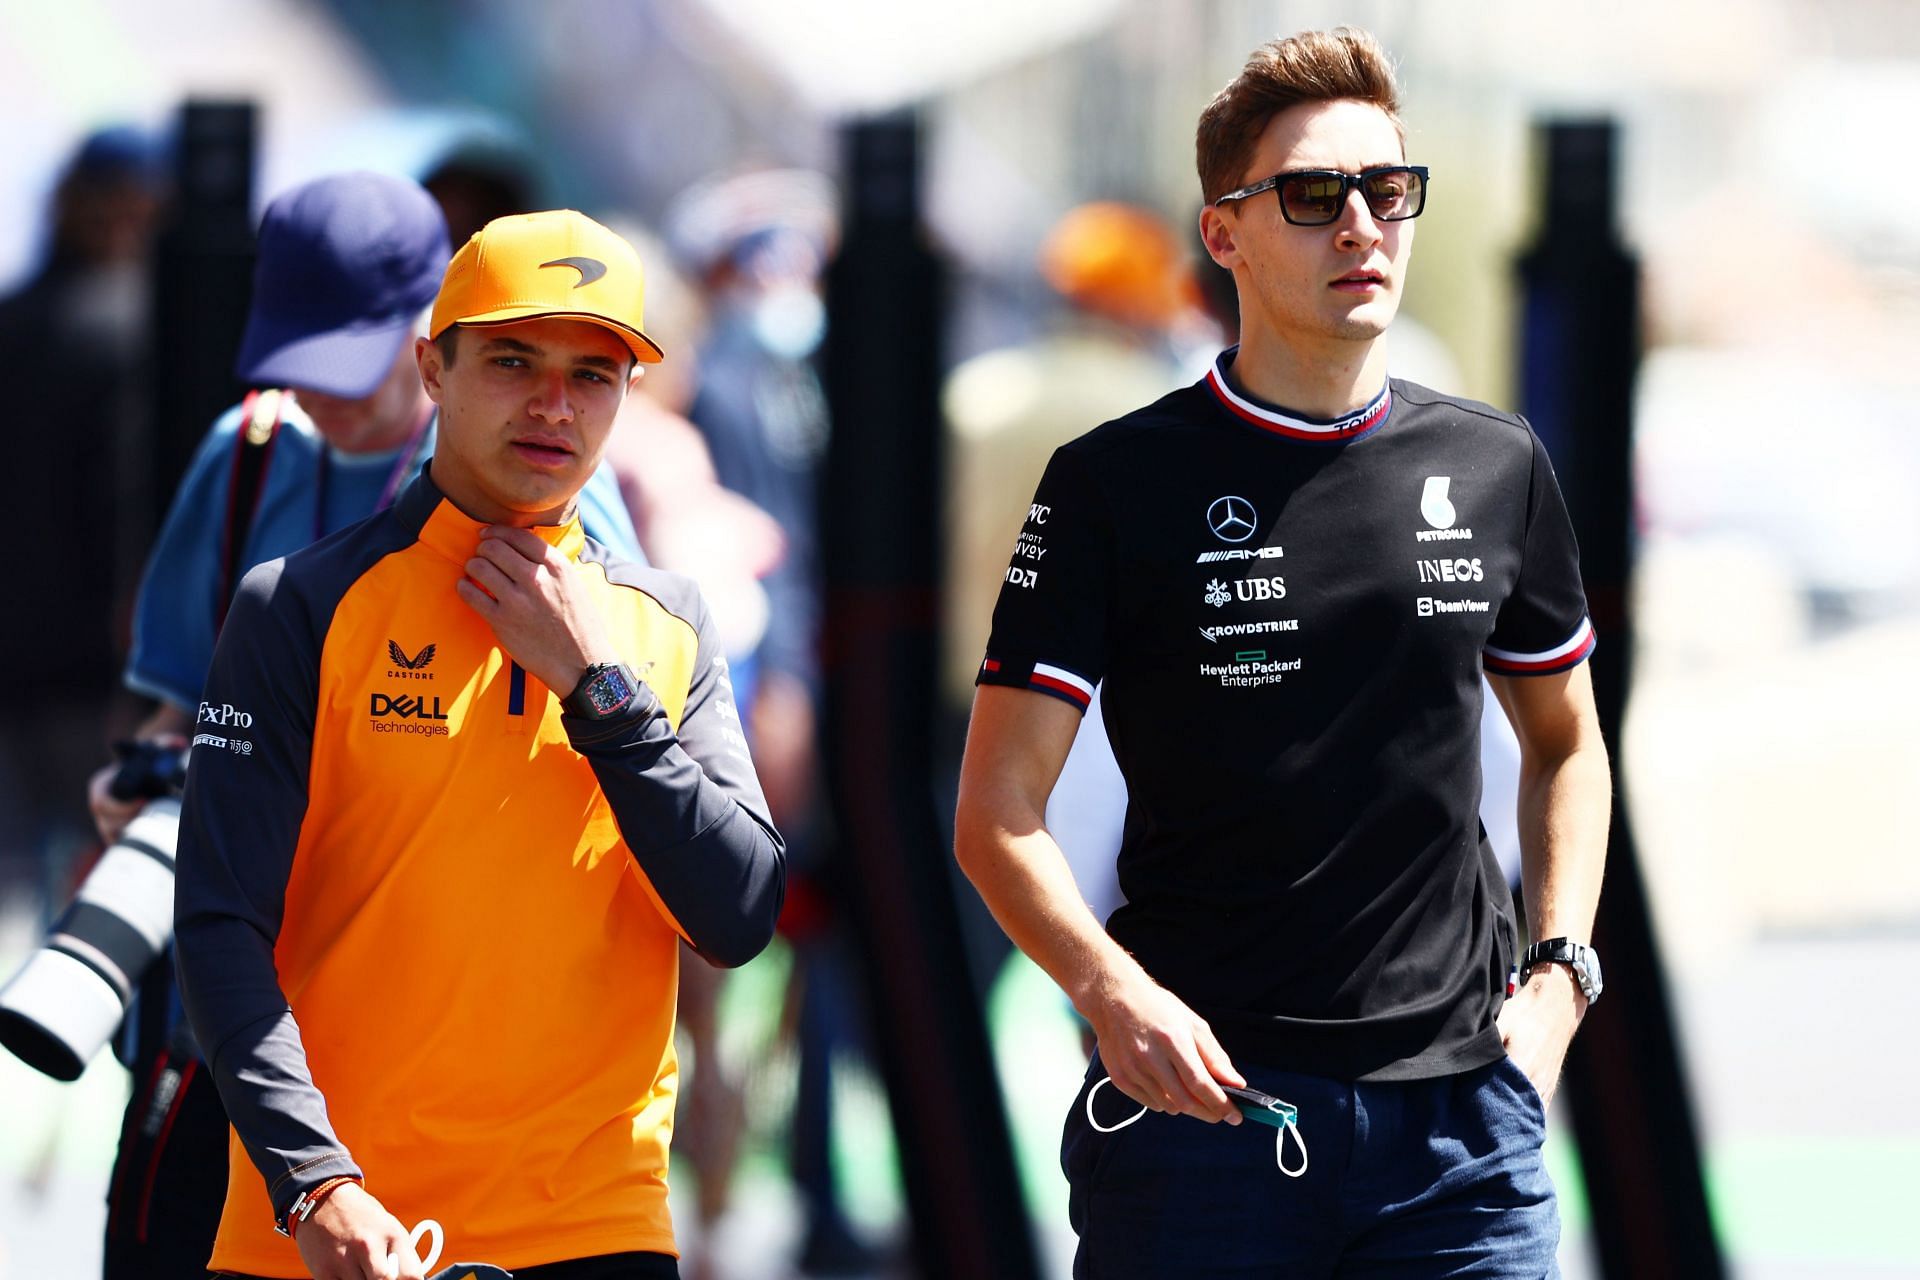 McLaren driver Lando Norris (left) and Mercedes driver George Russell (right) walk in the paddock together during the 2022 F1 Saudi Arabian GP weekend (Photo by Mark Thompson/Getty Images